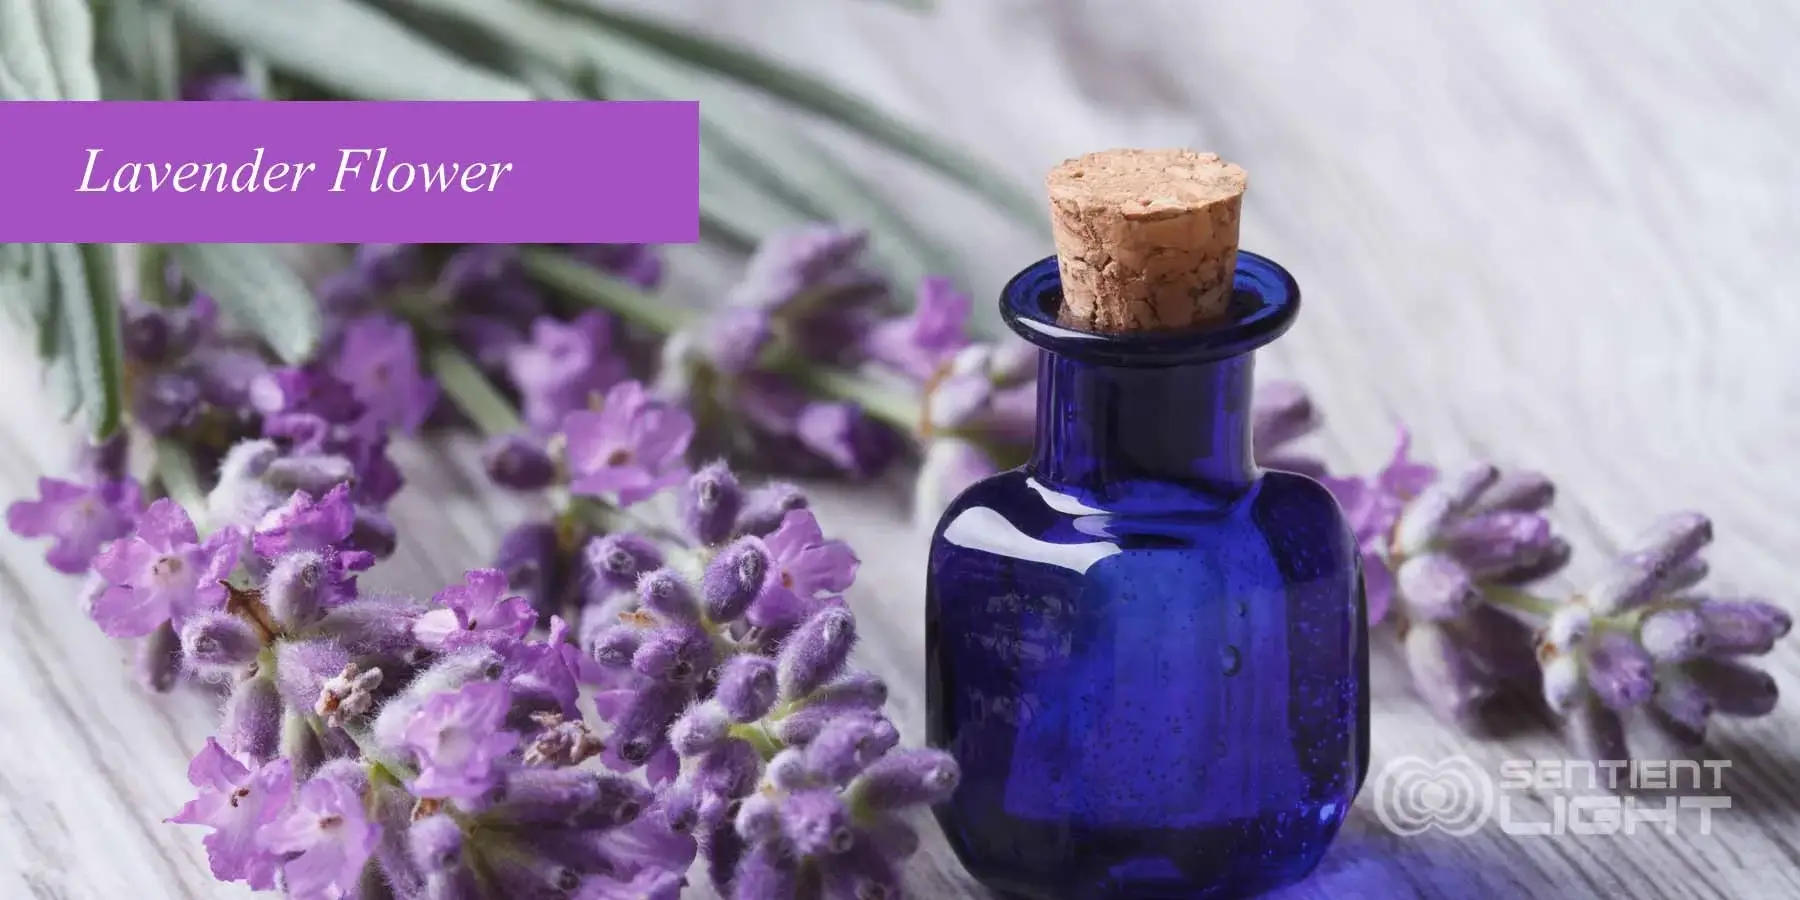 Benefits and Uses of Lavender